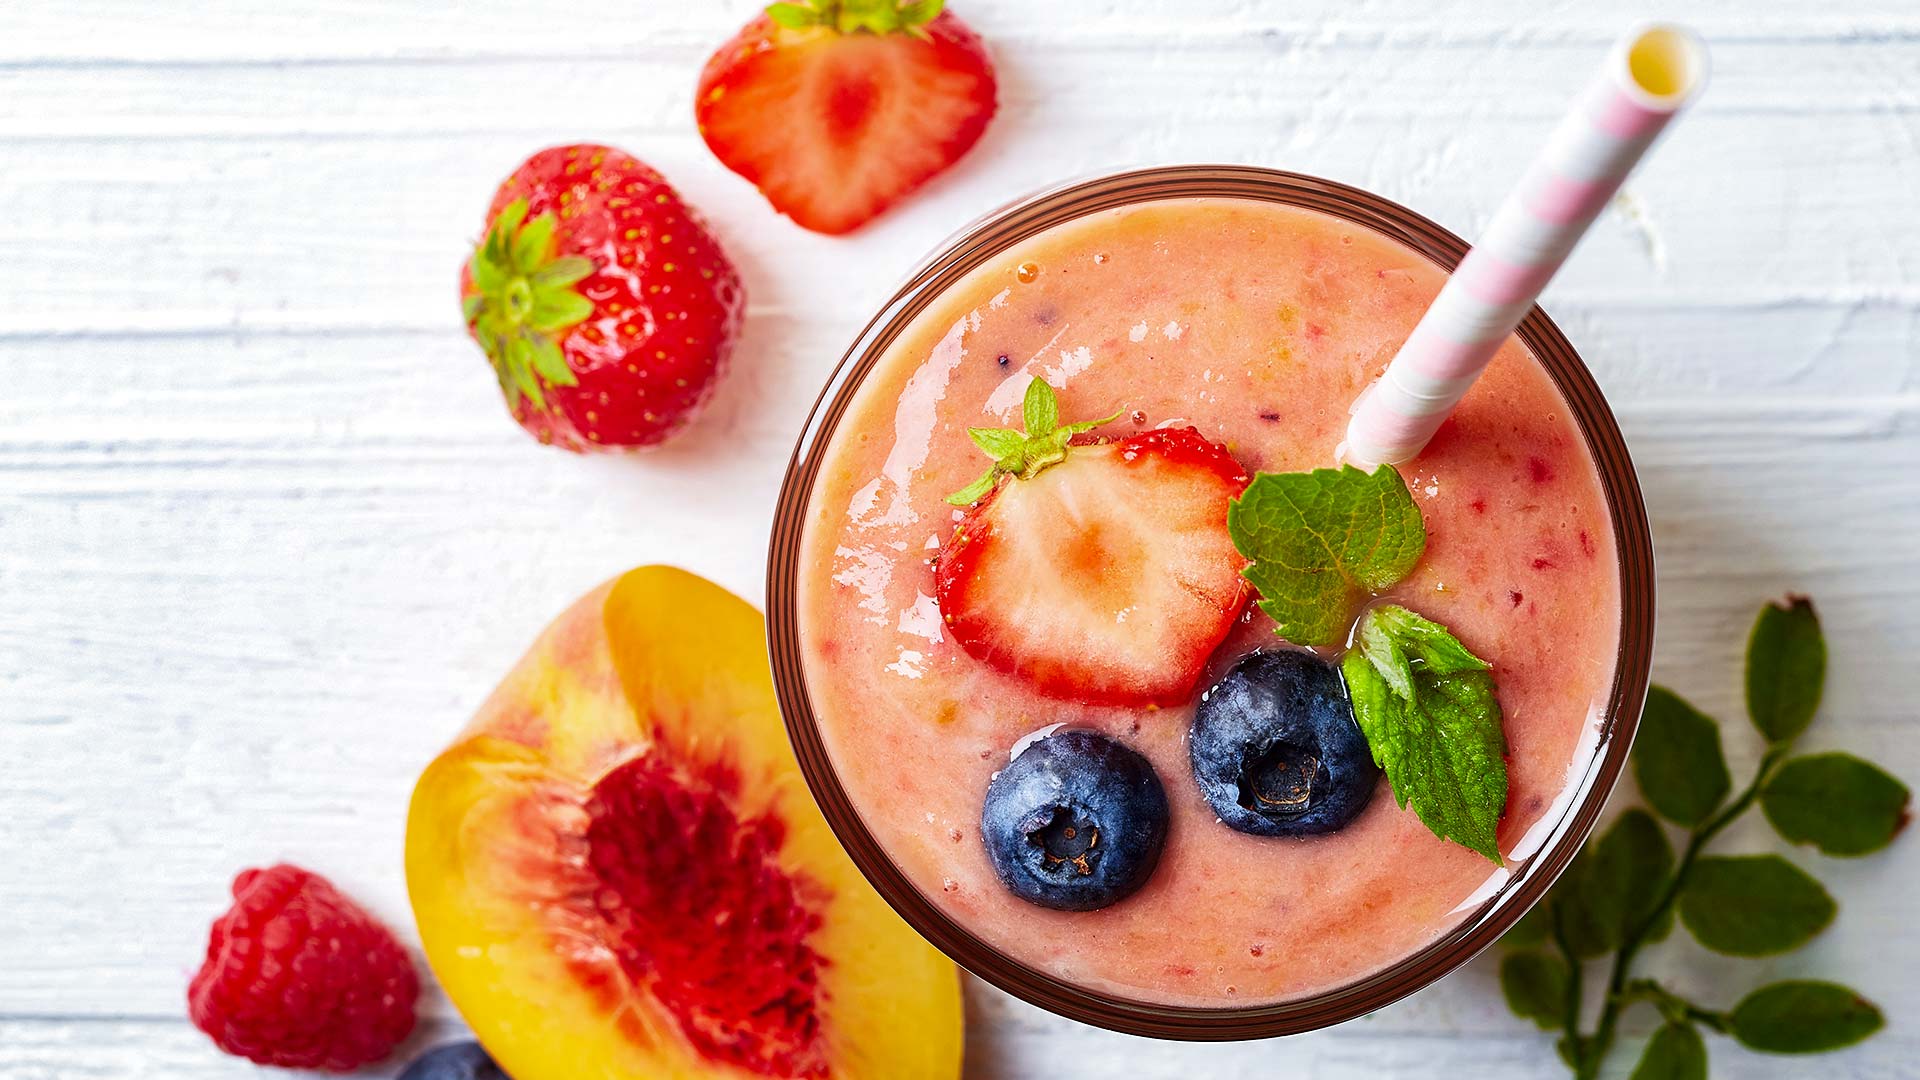 Peachy-Berry with Coconut Smoothie